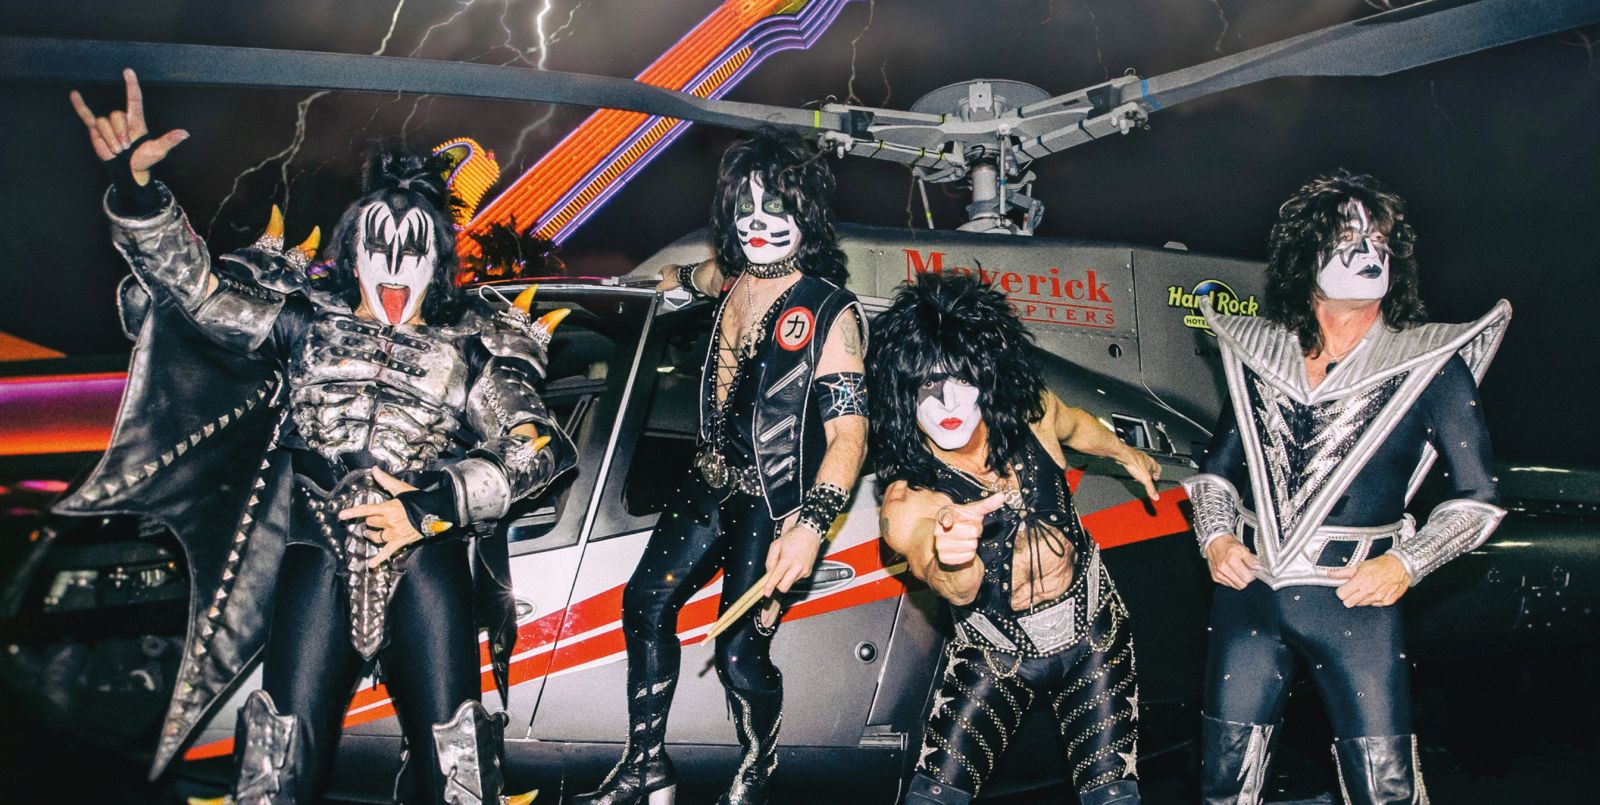 LAS VEGAS, NV - November 5:  KISS helicopter arrival before they perform opening night of their 9 show residency at The Joint at Hard Rock Hotel & Casino in Las Vegas, NV on November 5, 2014. © Erik Kabik Photography/ Retna Ltd. ***HOUSE COVERAGE***